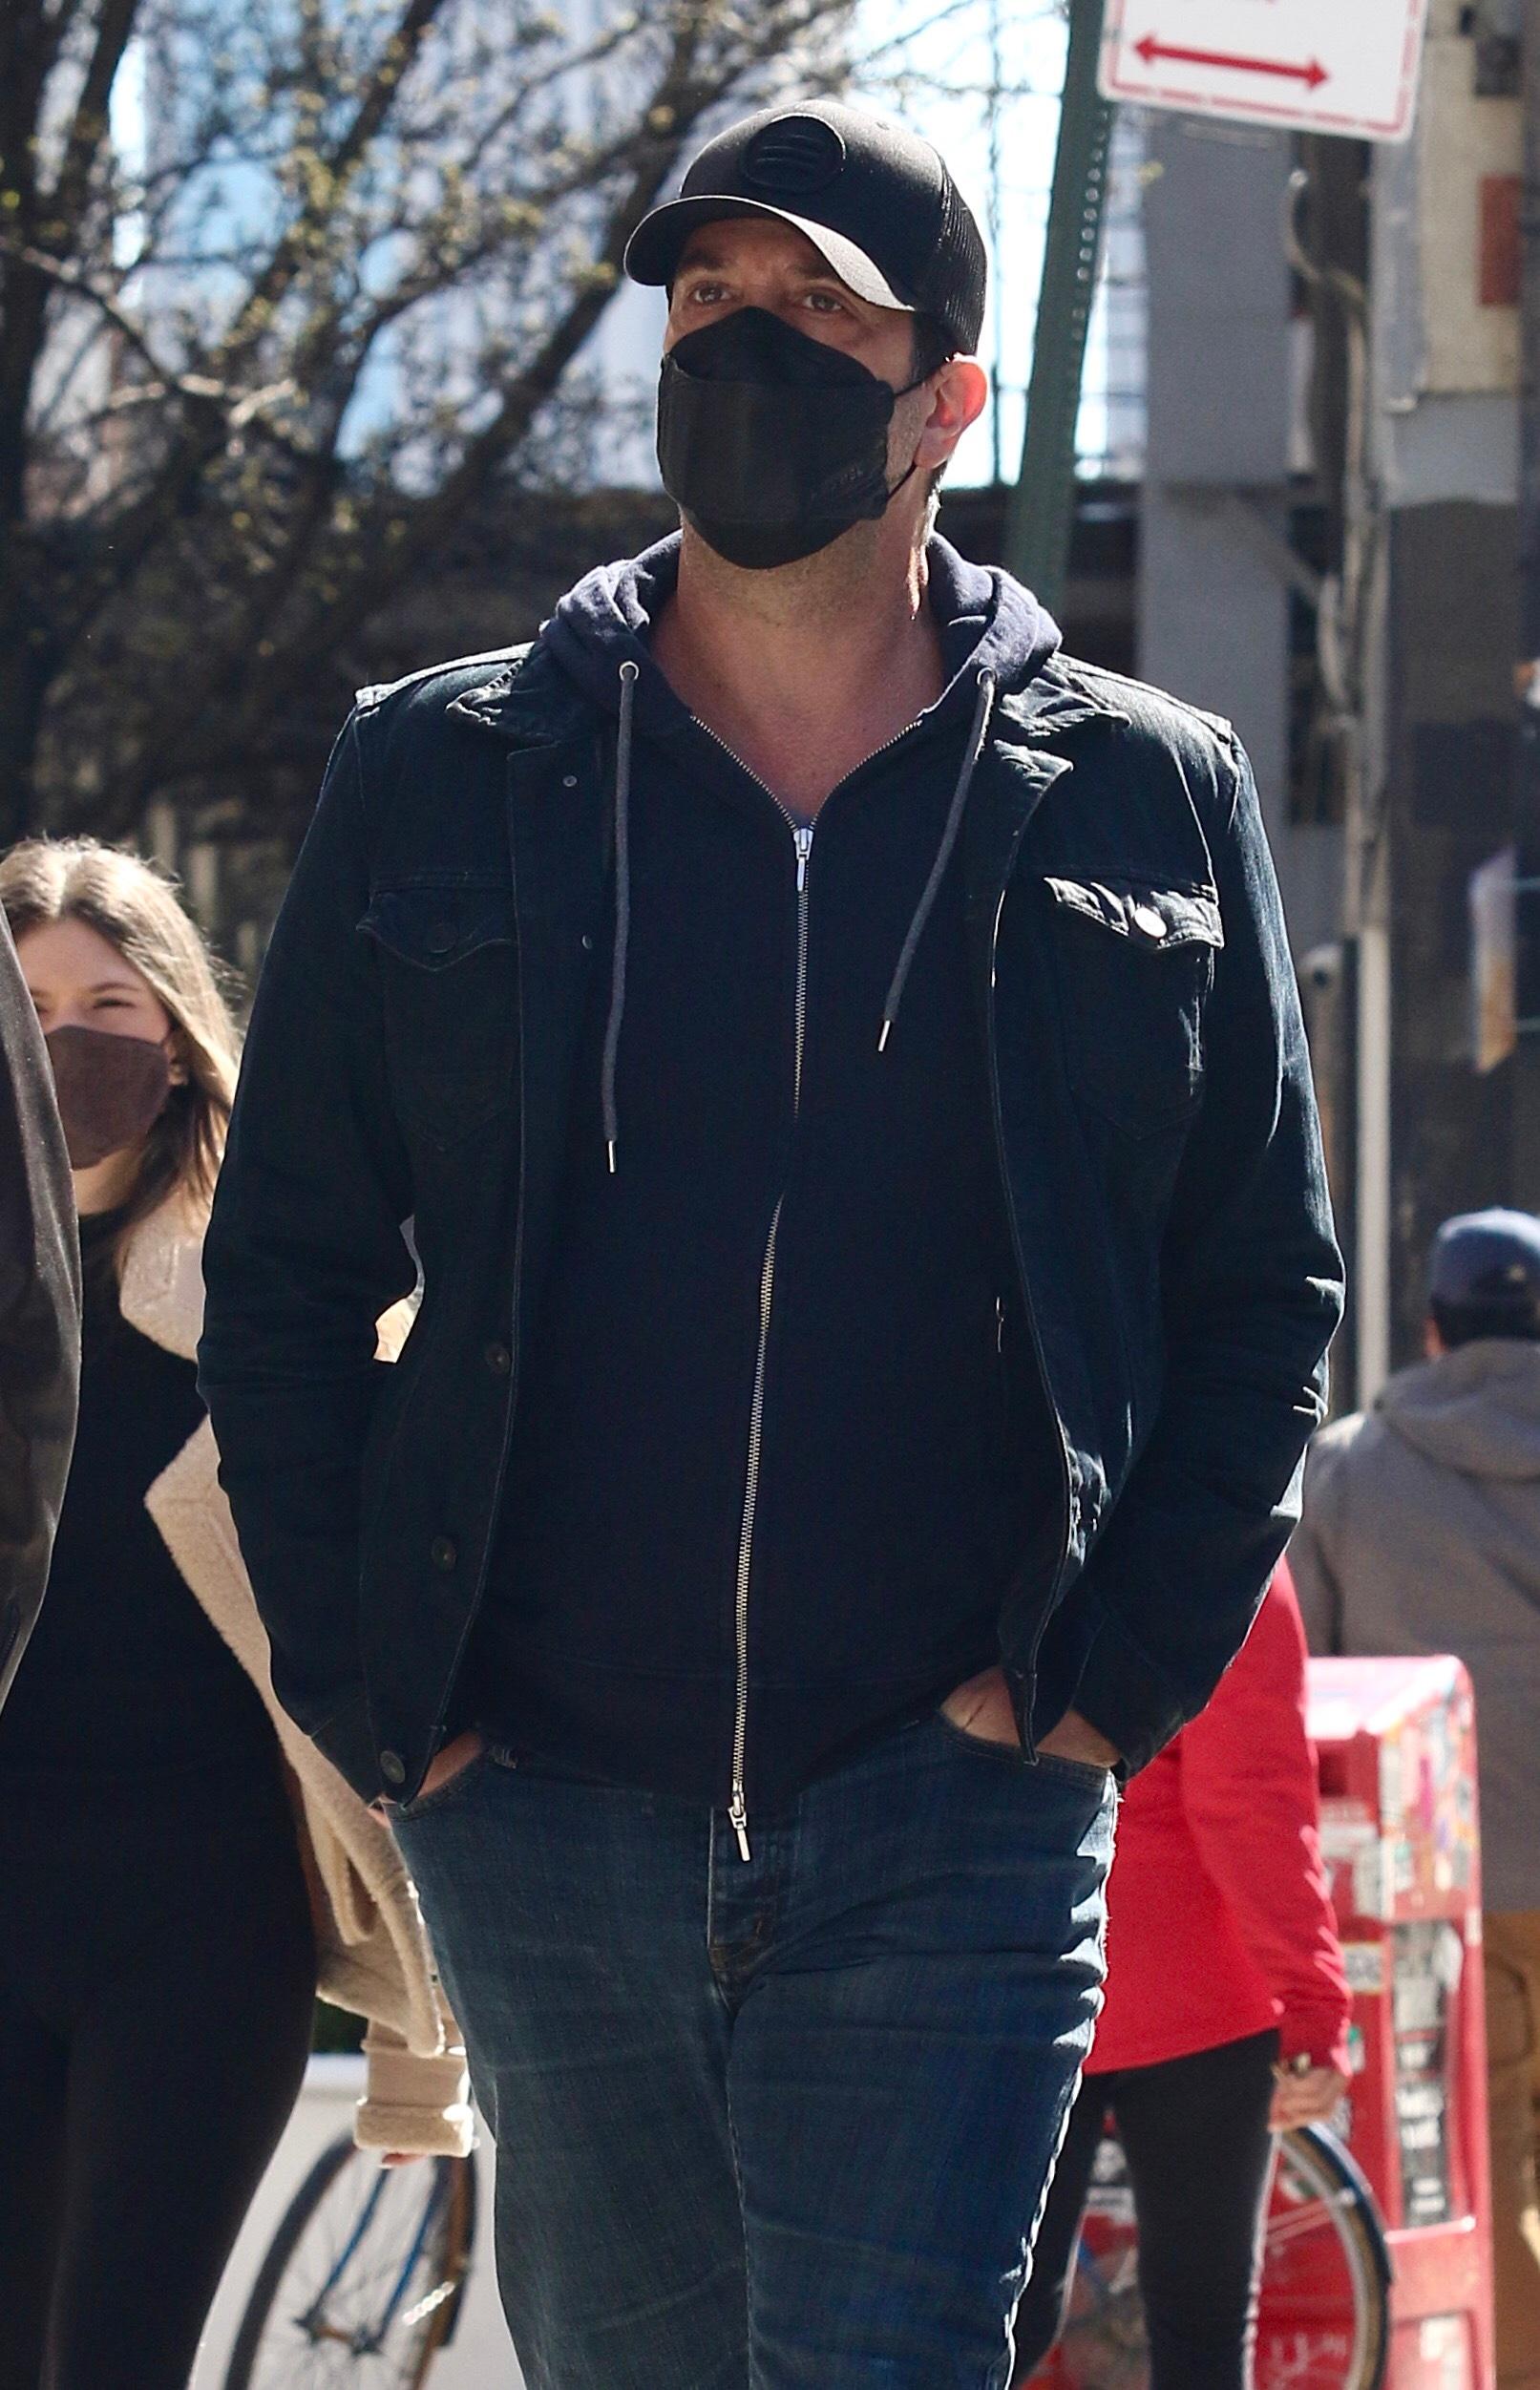 David Schwimmer is seen out and about after having lunch with a friend in NYC